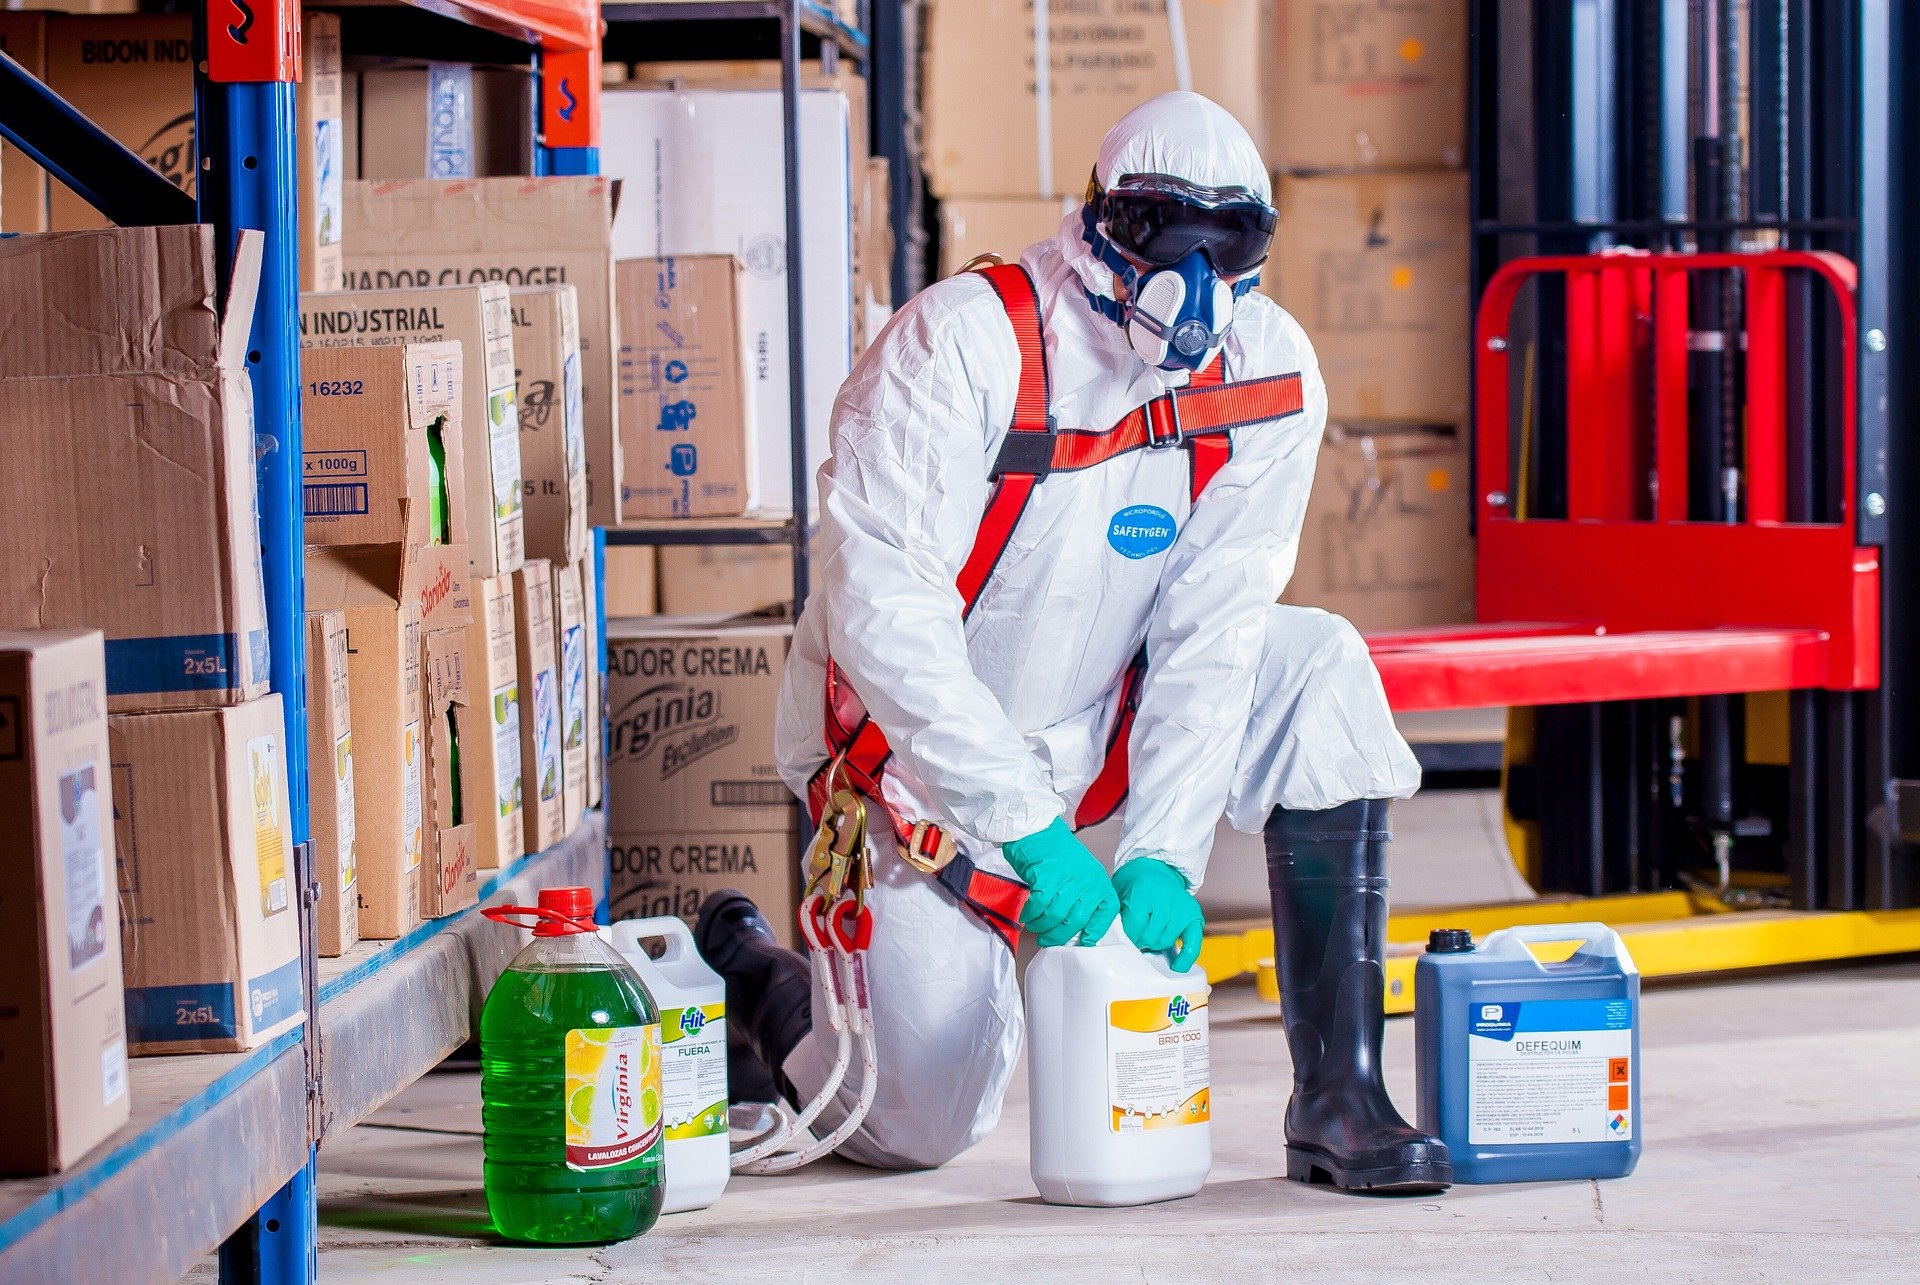 What is included in the category of Hazardous Substances?